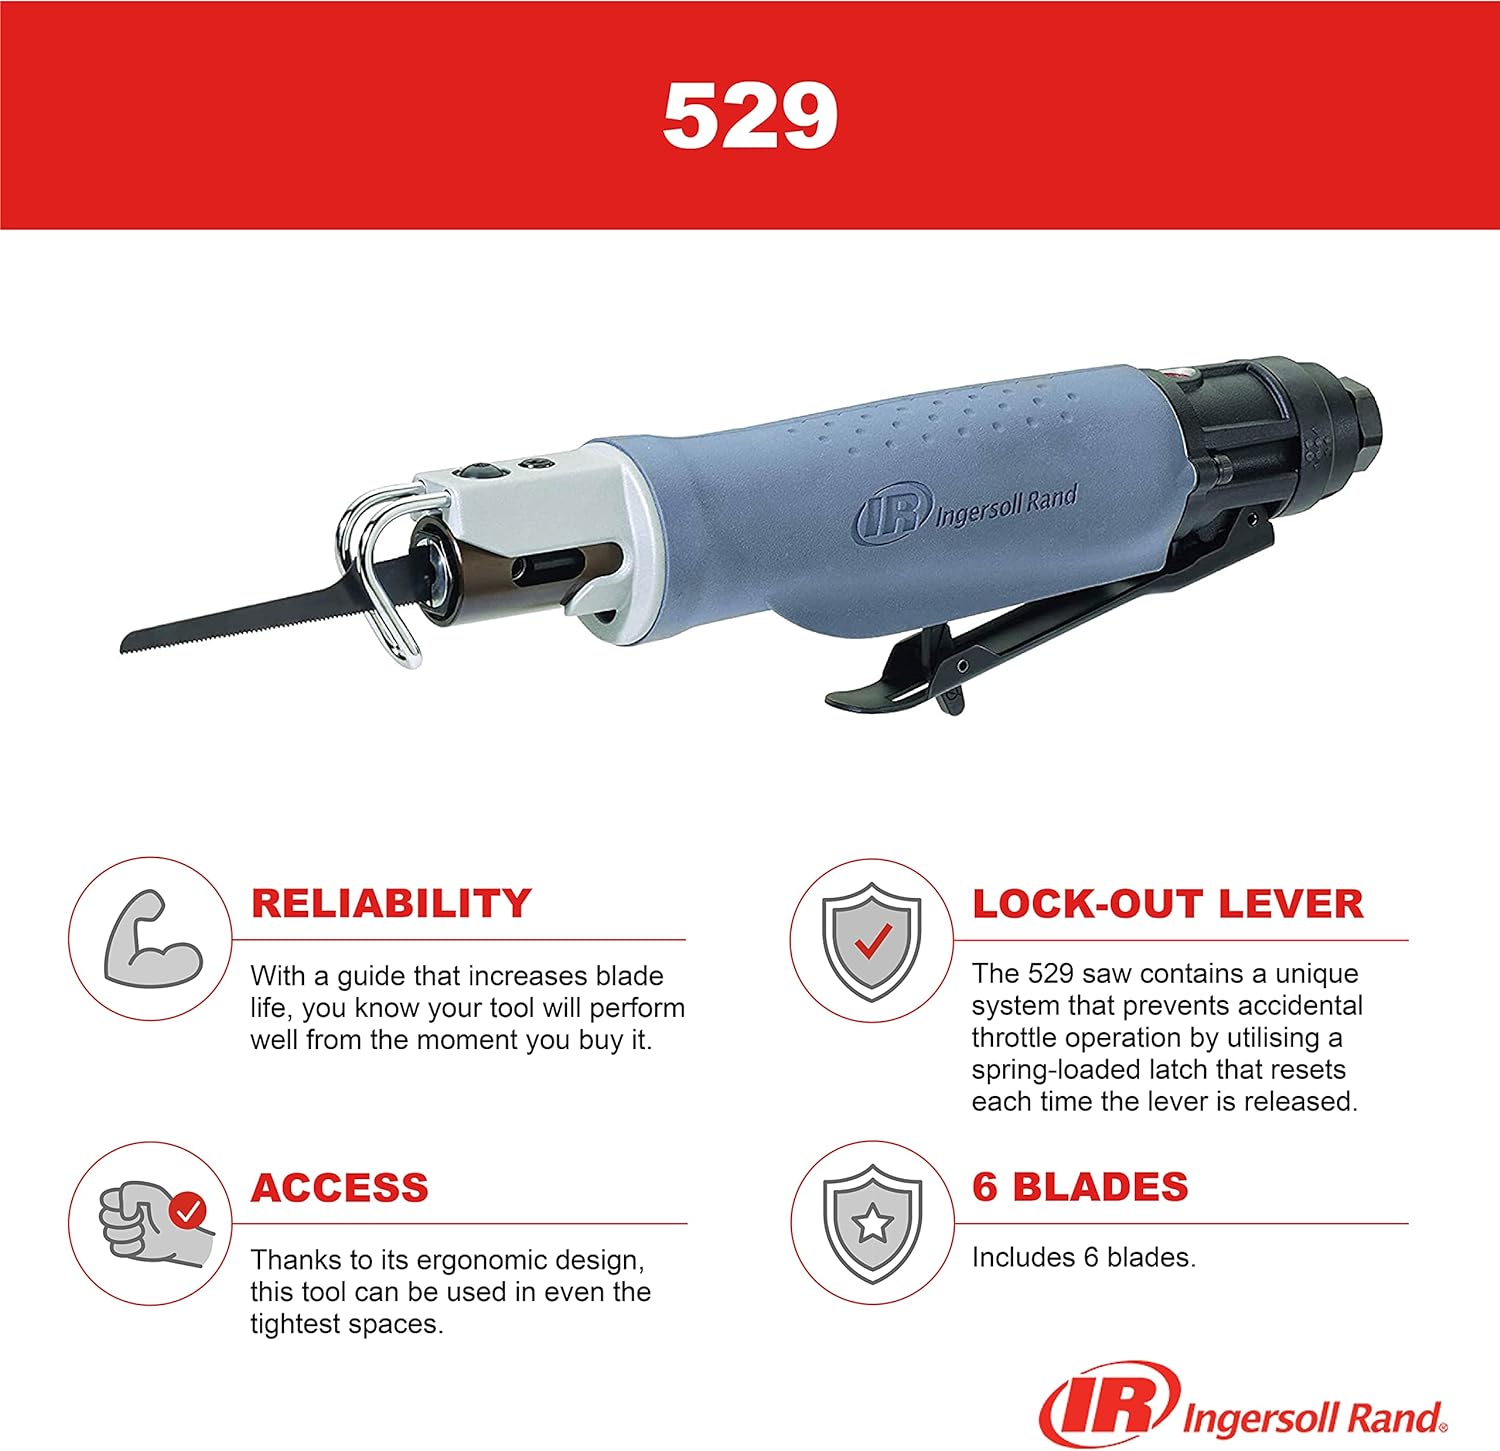 Ingersoll Rand 529 Reciprocating Air Saw, Low Vibration, Lock Out Lever, 6 Blades for Cutting Plastic, Fiberglass, Sheet Metal, Aluminum  5108MAX Air Grinder,Grey